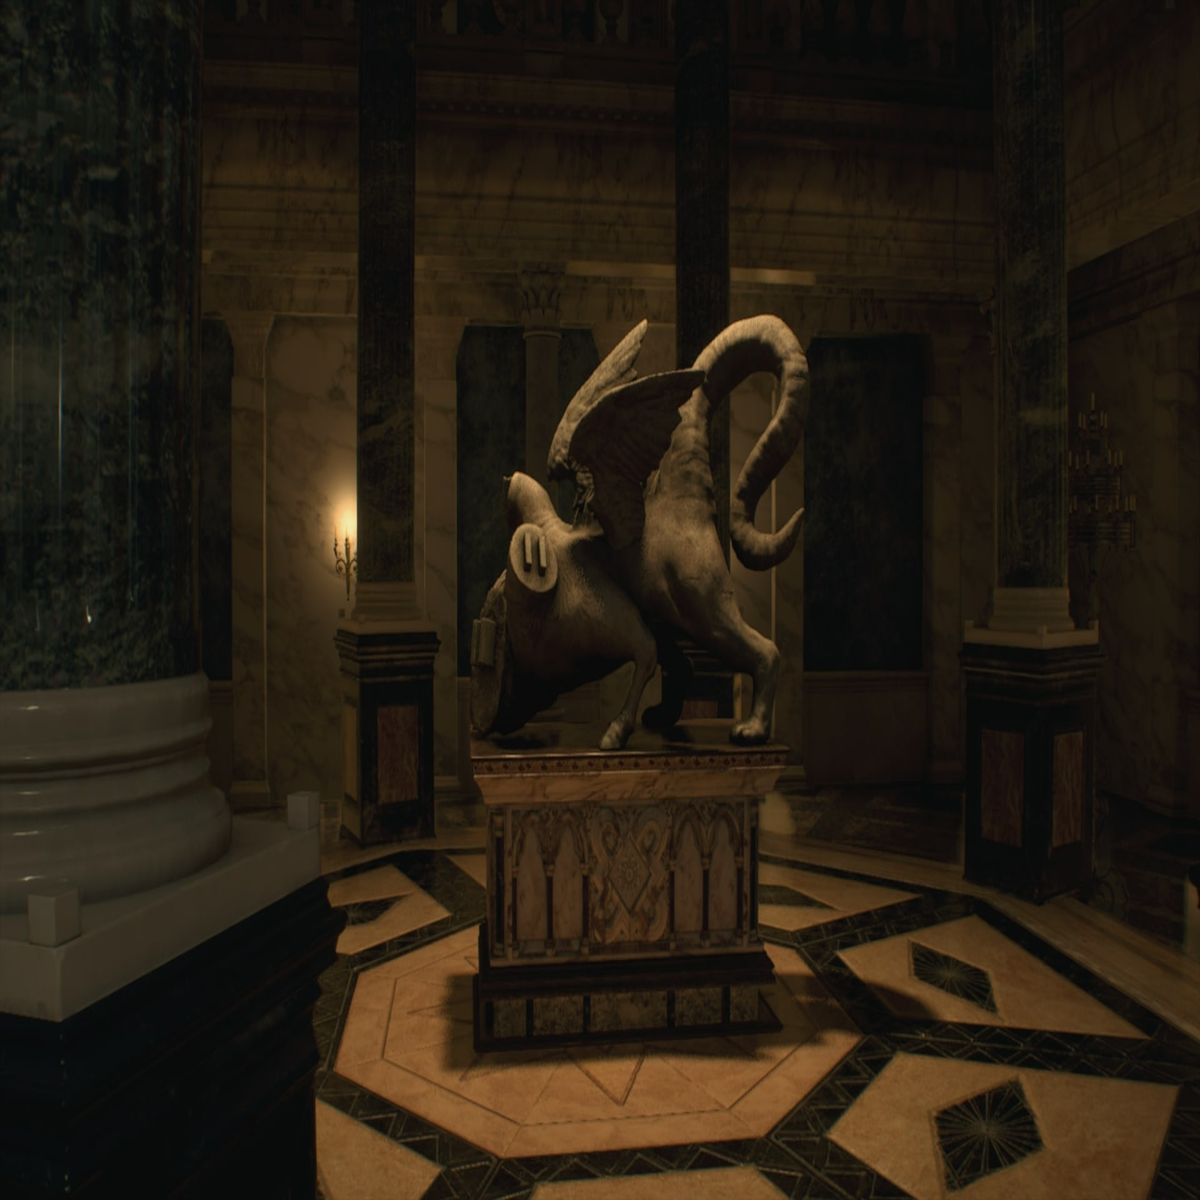 Resident Evil 4: how to unlock the Serpent's Head